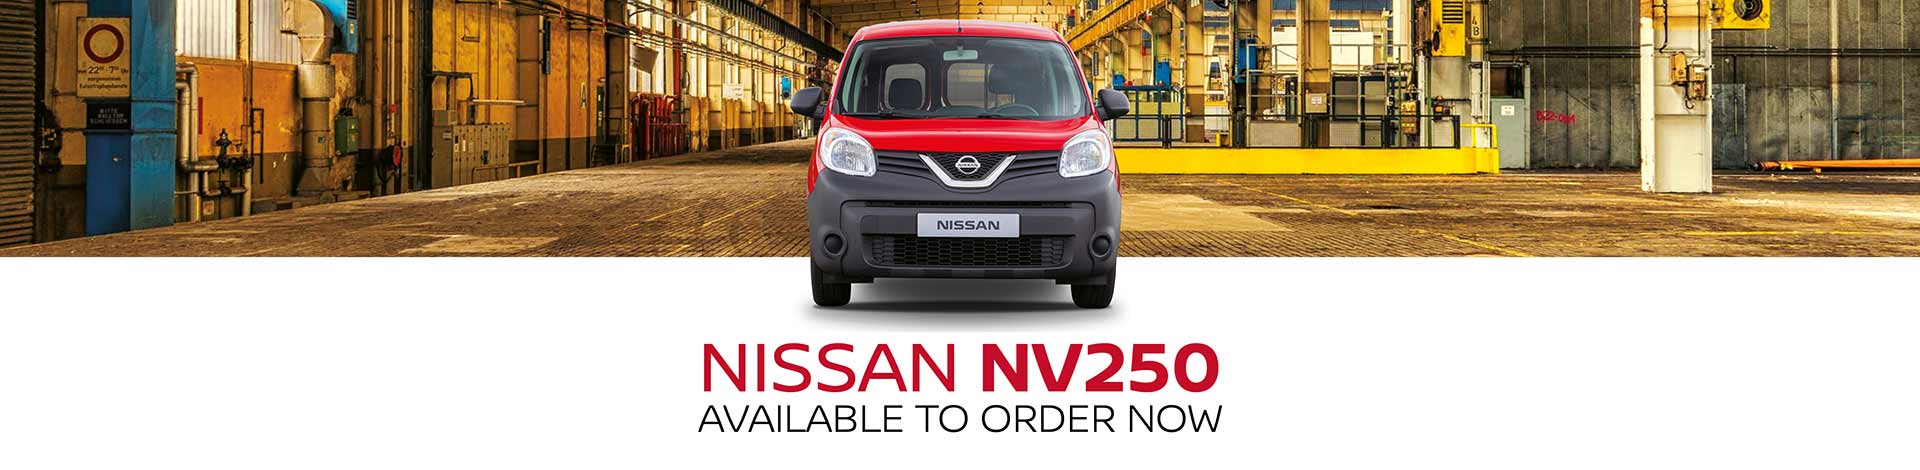 Nissan Nv250 available now